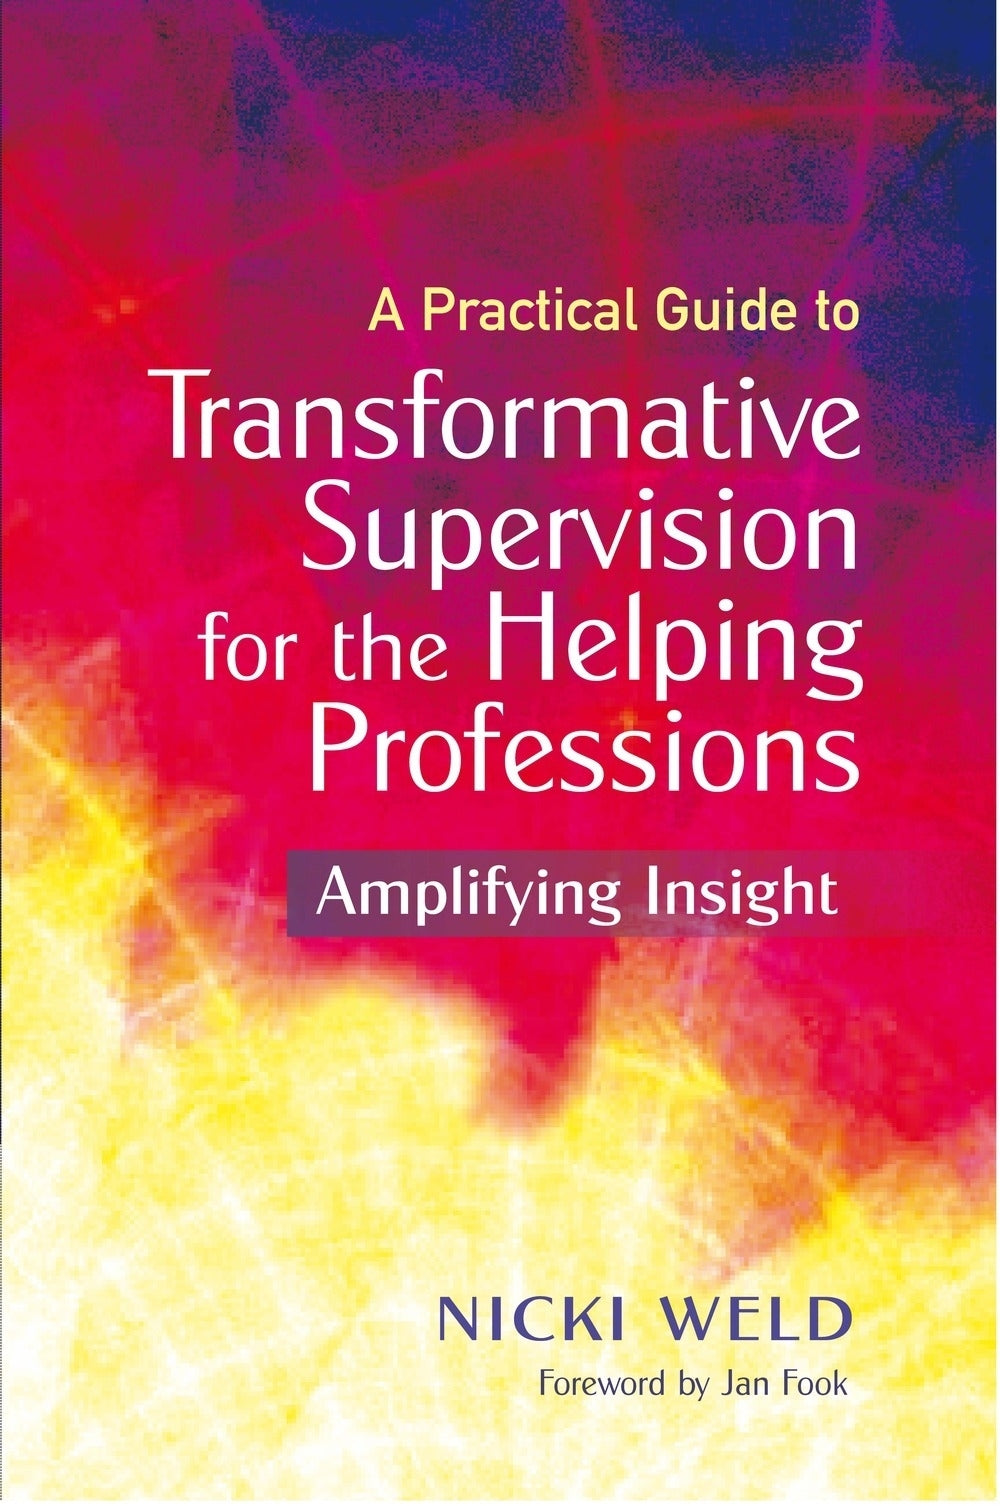 A Practical Guide to Transformative Supervision for the Helping Professions by Nicki Weld, Jan Fook